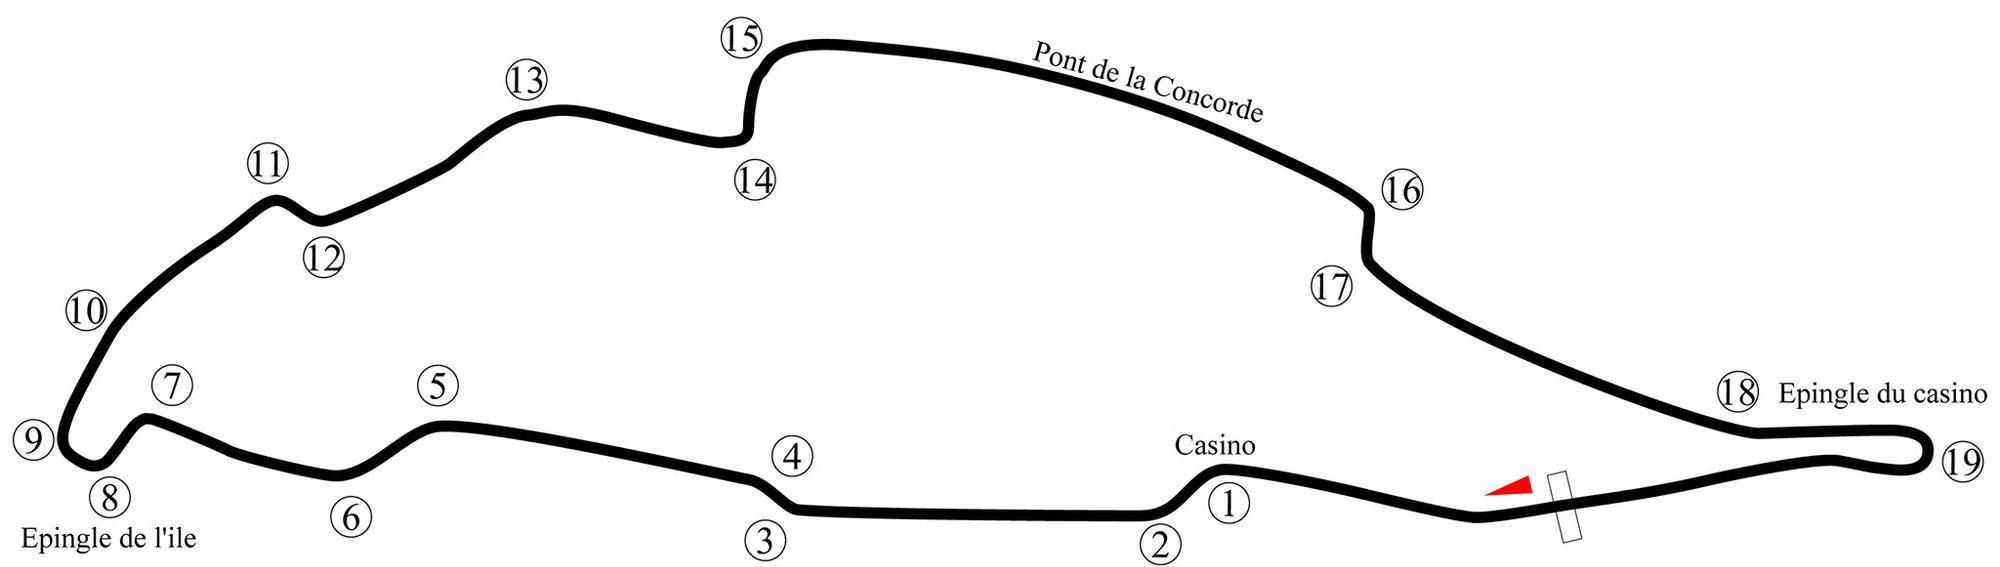 Circuit Gilles Villeneuve. By Xander89 - Own work, CC BY-SA 3.0, https://commons.wikimedia.org/w/index.php?curid=19748805